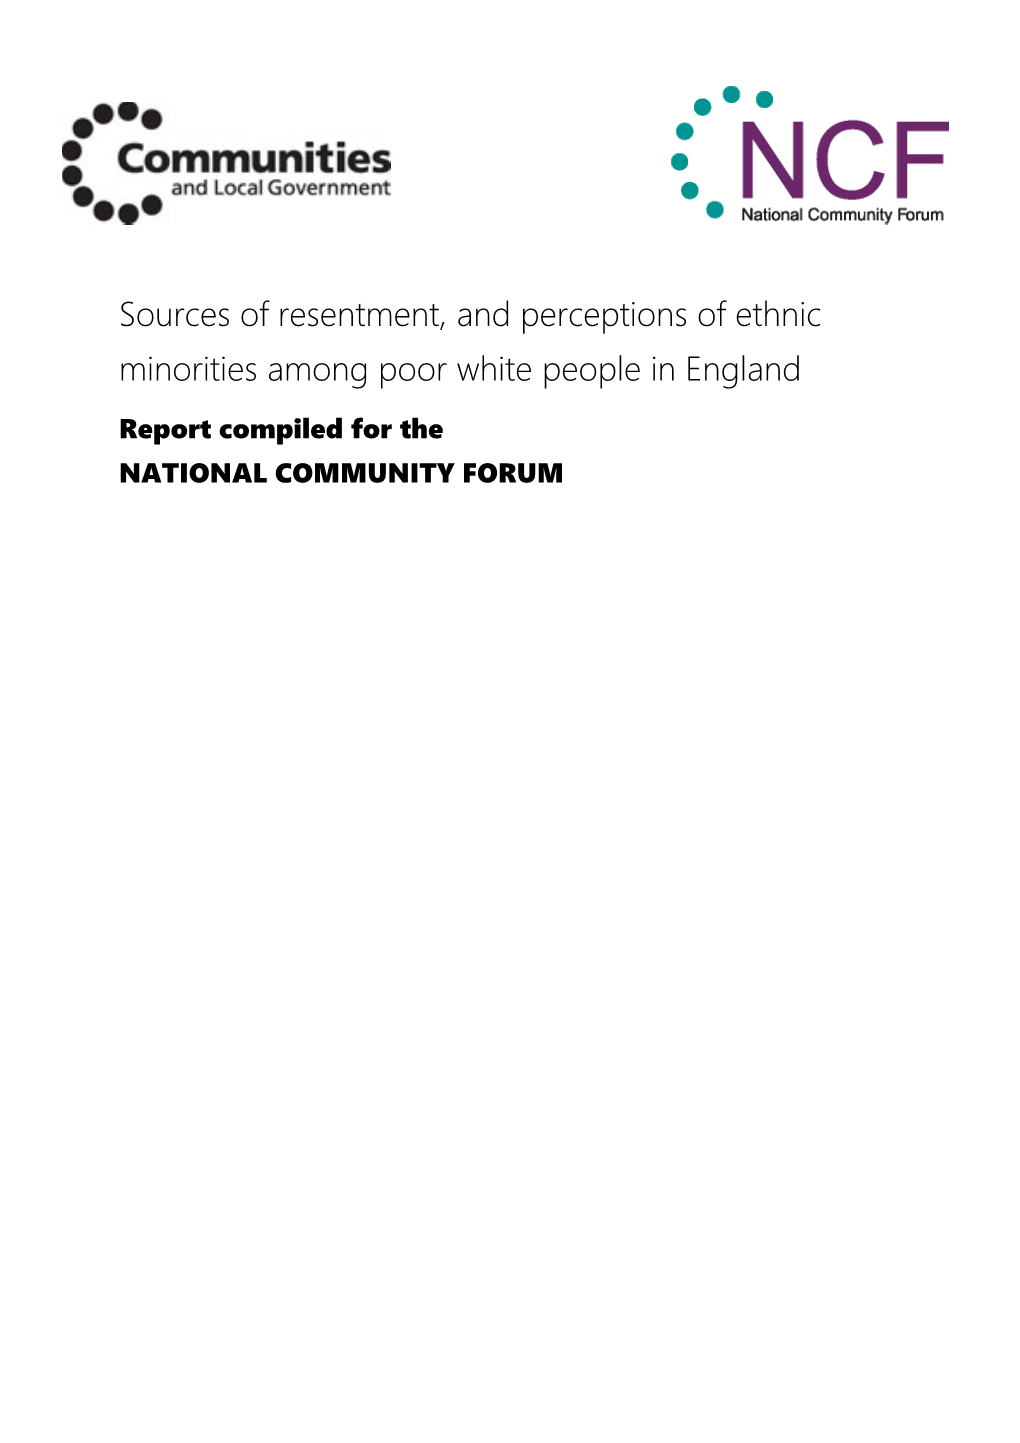 Sources of Resentment, and Perceptions of Ethnic Minorities Among Poor White People in England